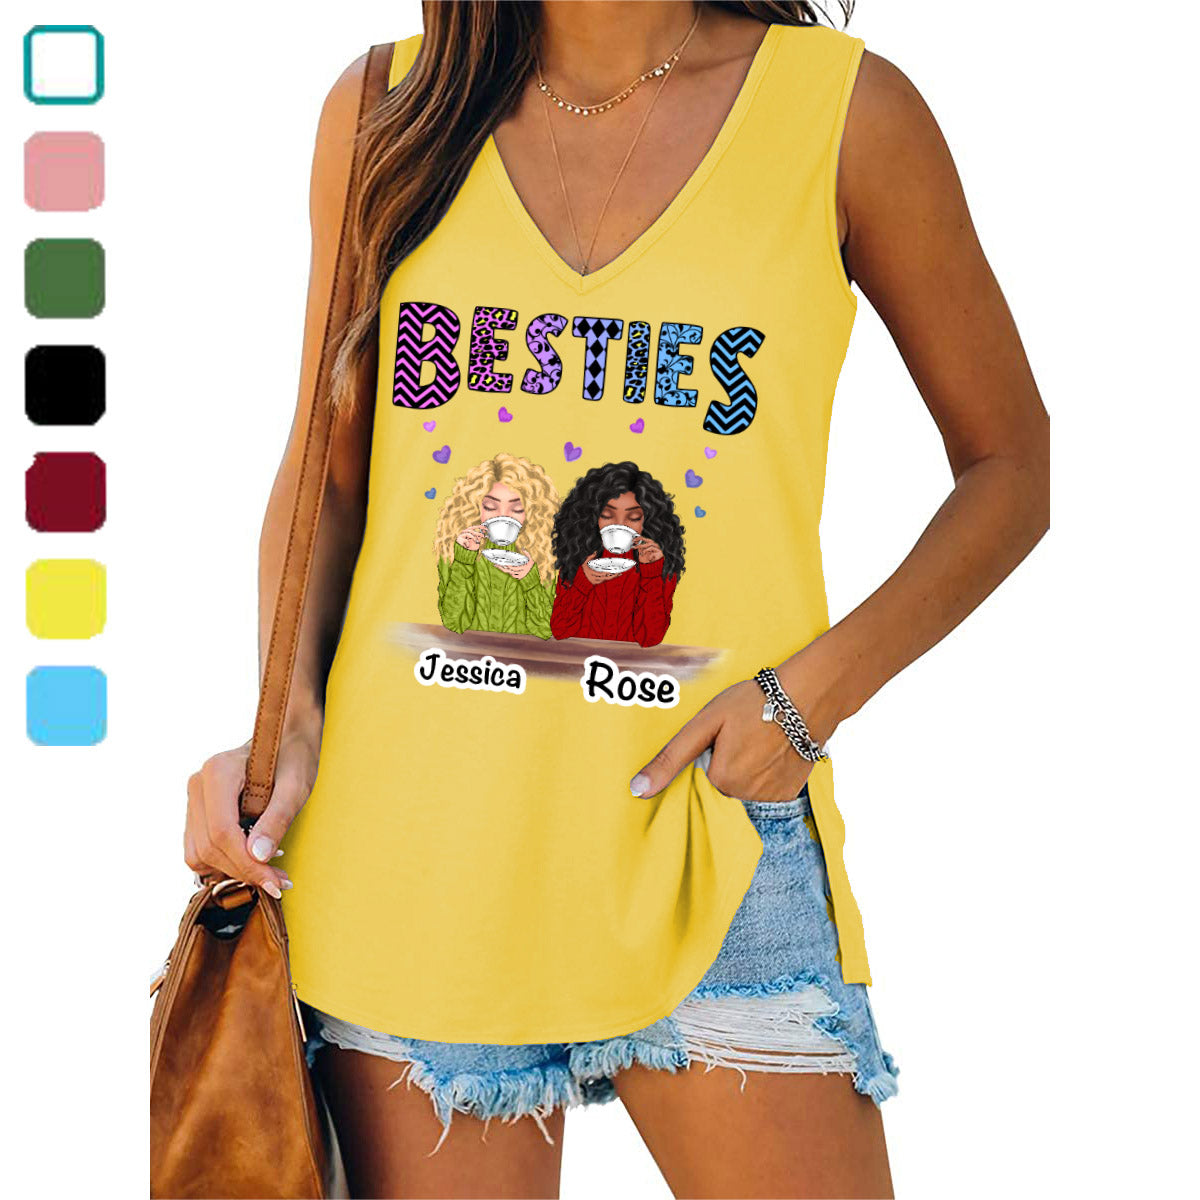 Beautiful Besties Colorful Patterned Personalized Women Tank Top V Neck Casual Flowy Sleeveless